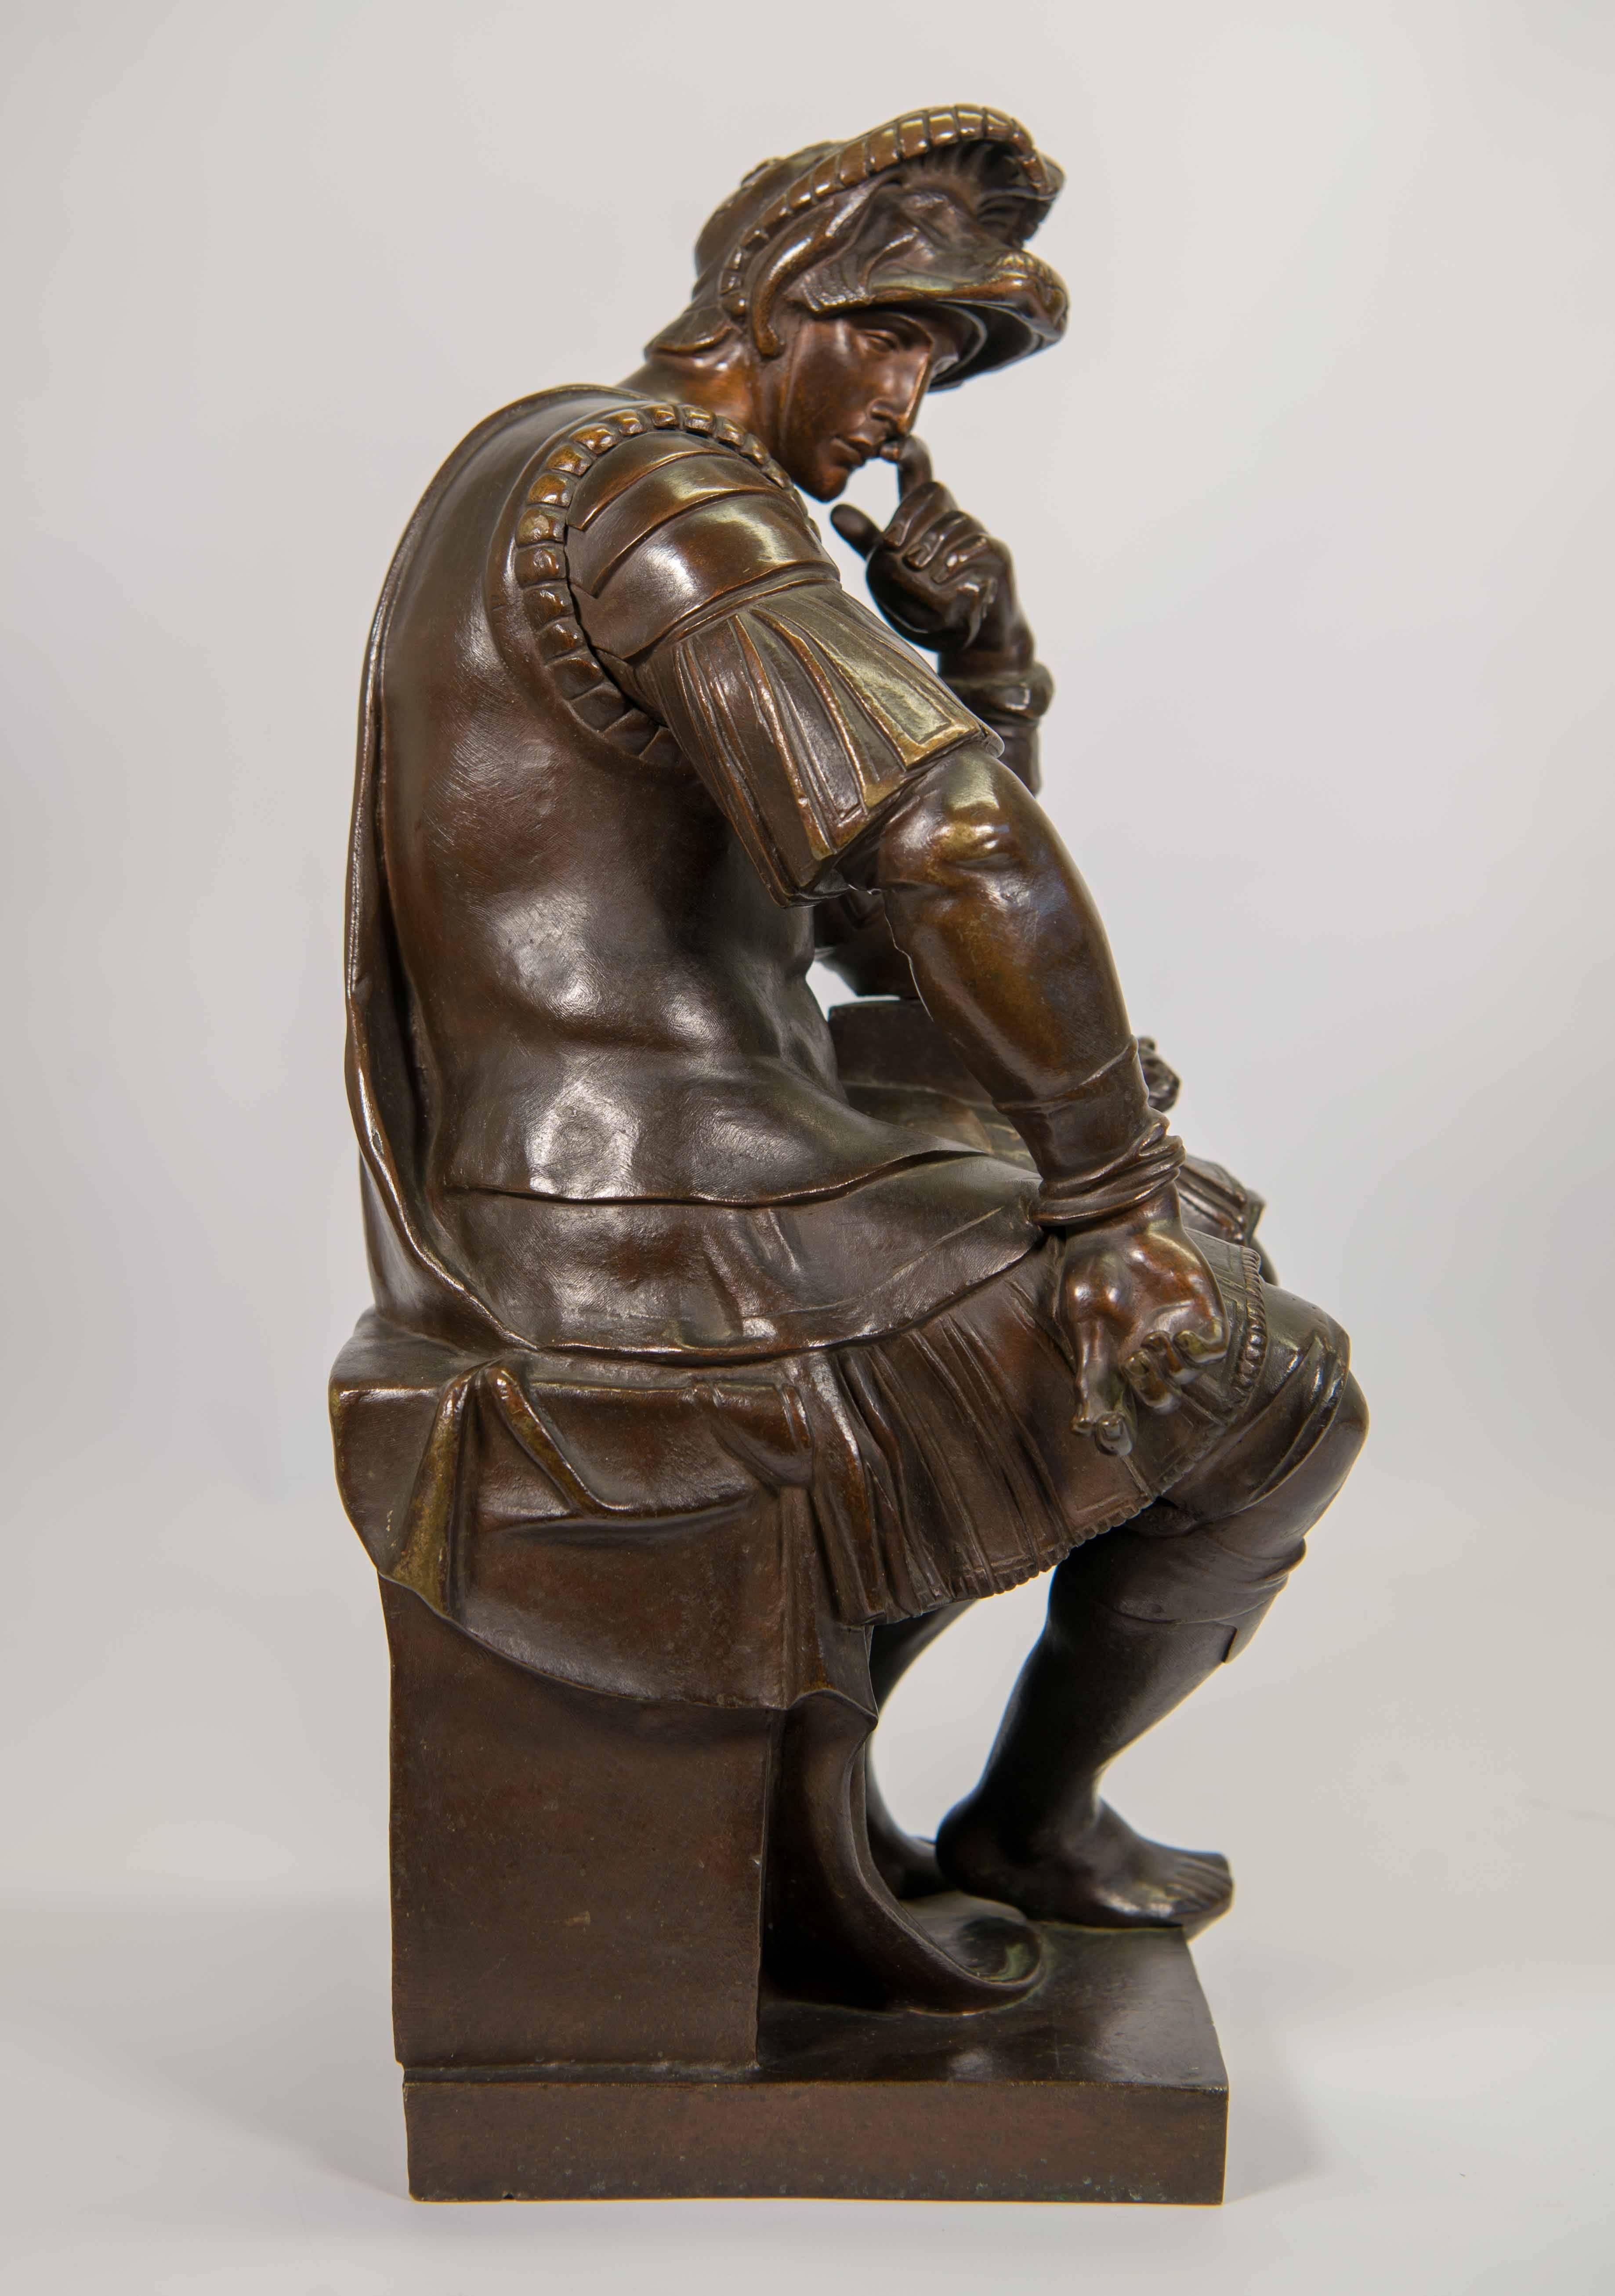 We have this very nice bronze statue likely by Michel Ange Pollet (1815-1870). The statue shows Lorenzo Di Piero de' Medici. The statue is made of patinated bronze and is dark brown in color. The statue was designed by Michelangelo and is standing